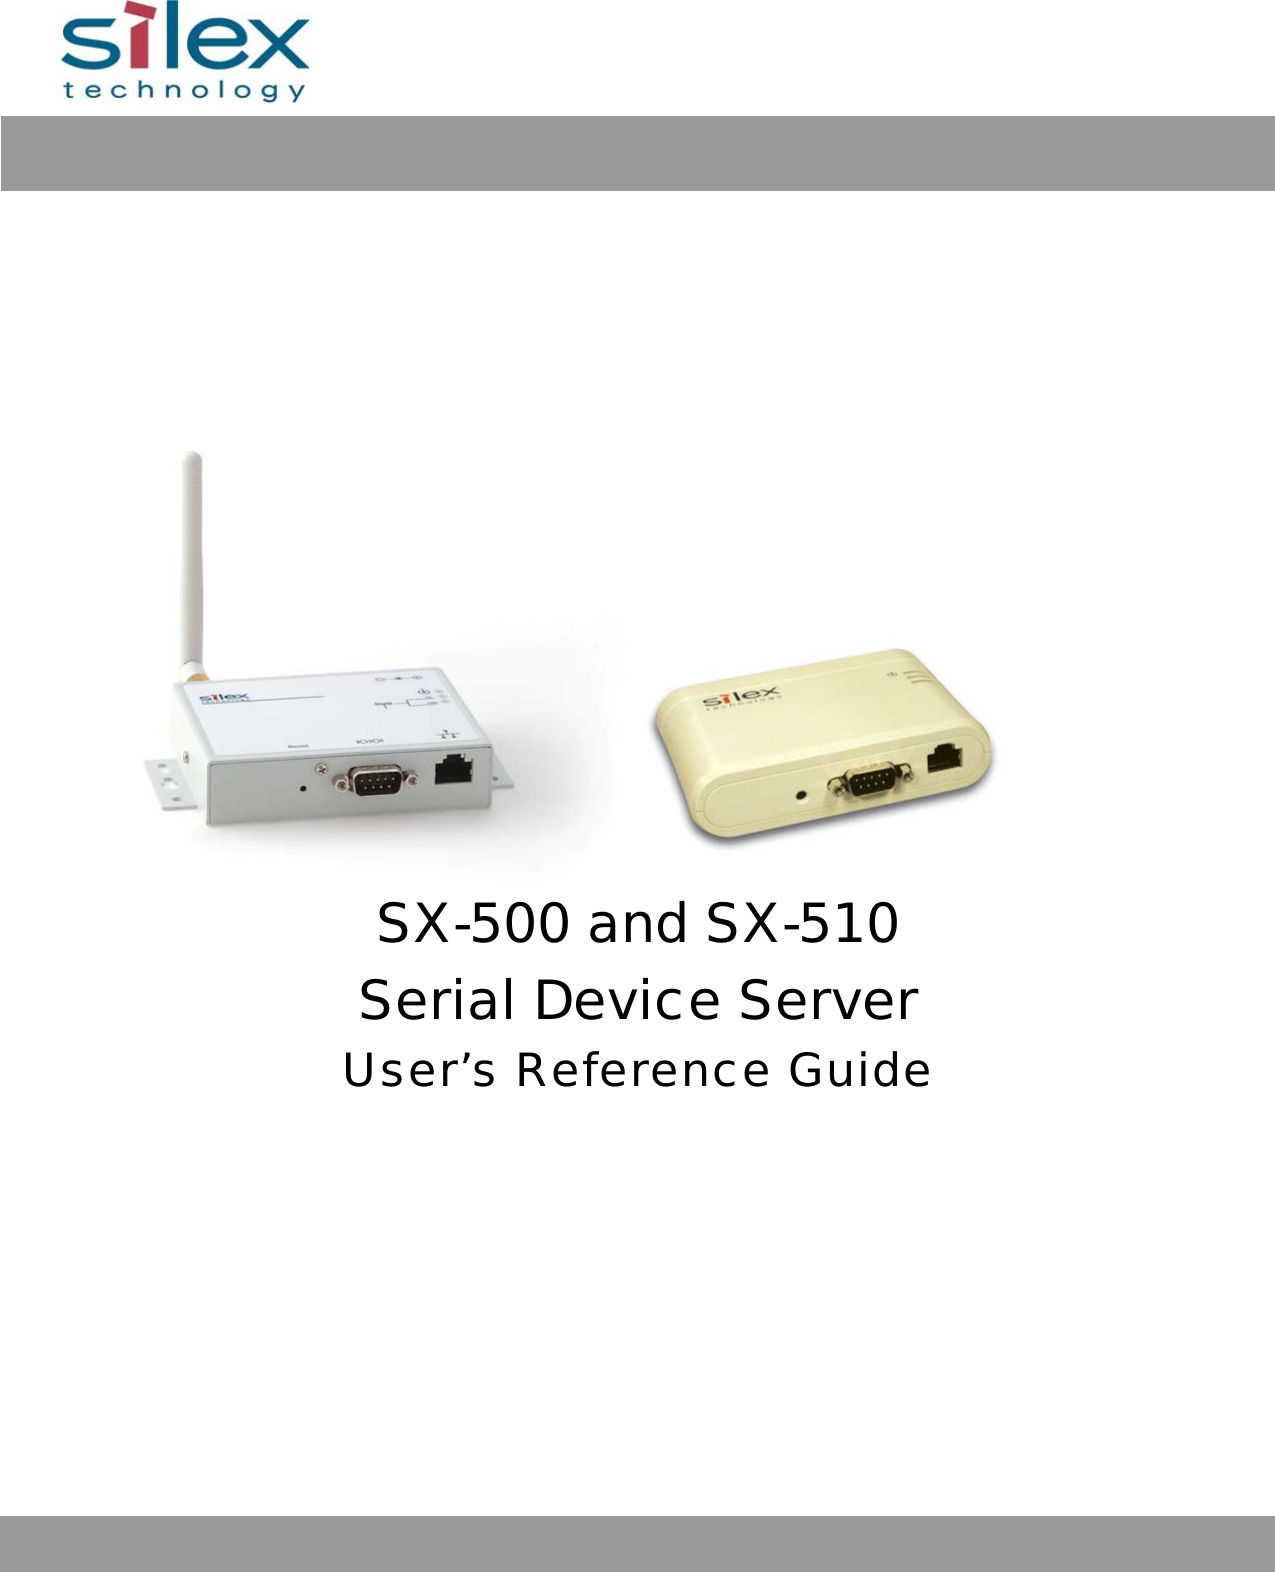              SX-500 and SX-510  Serial Device Server  User’s Reference Guide     